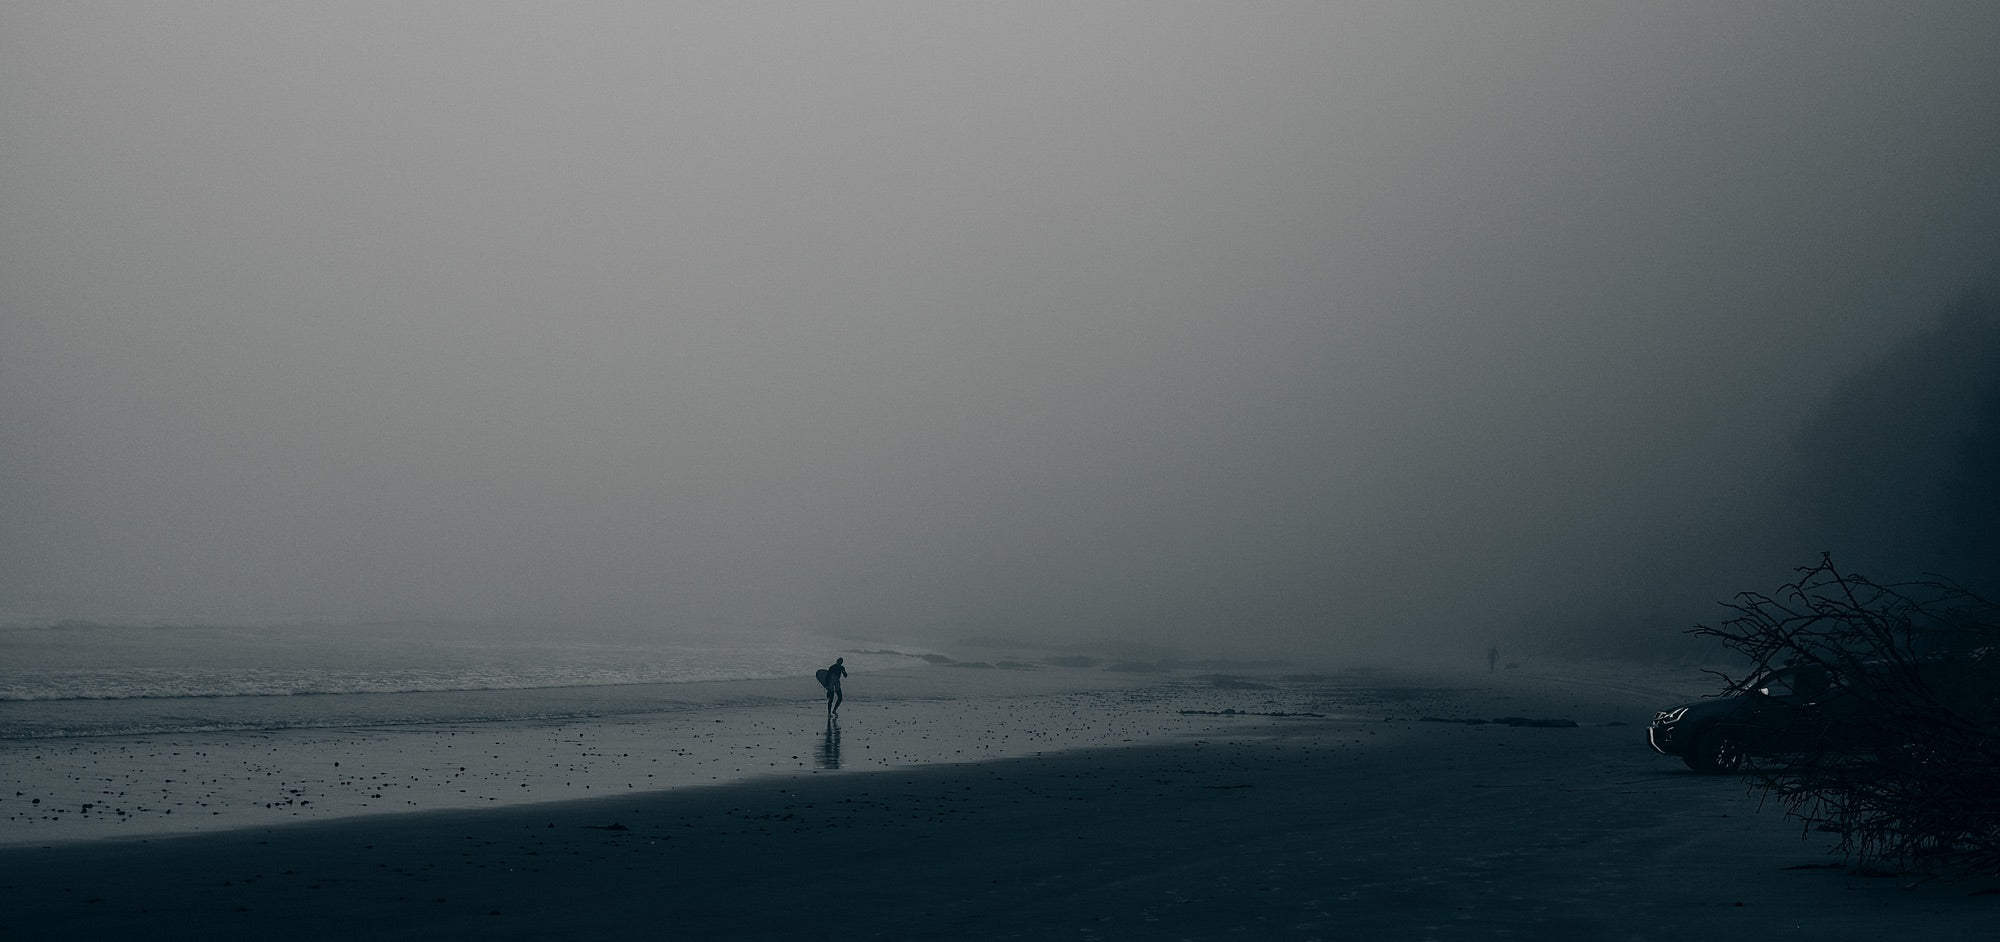 A surfer walks along a beach shrouded in mist as another figure approaches from the distance